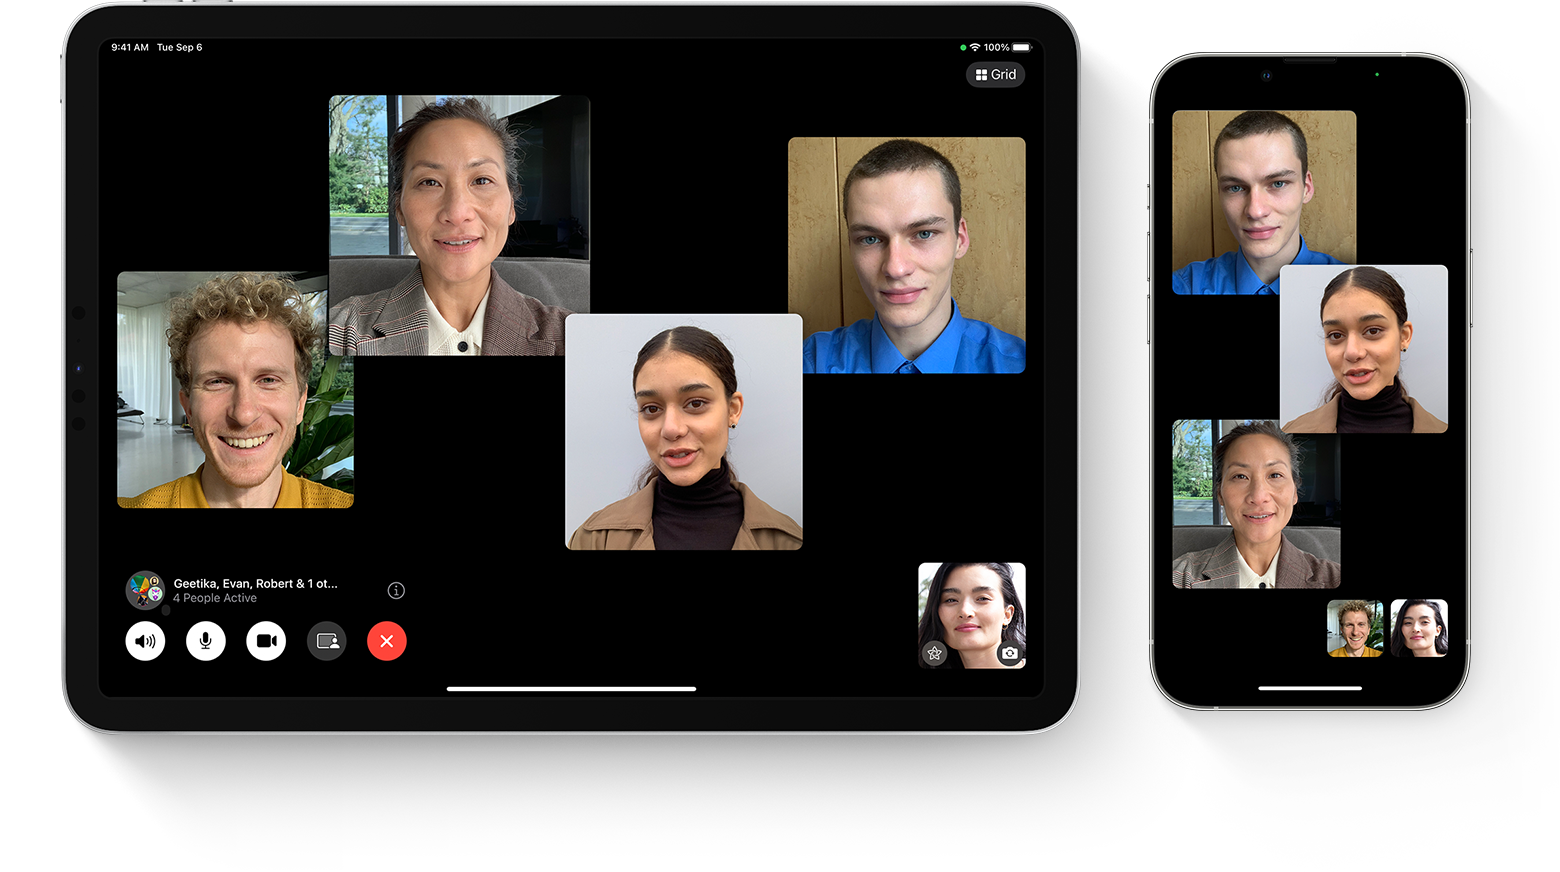 Use Group FaceTime on your iPhone or iPad - Apple Support